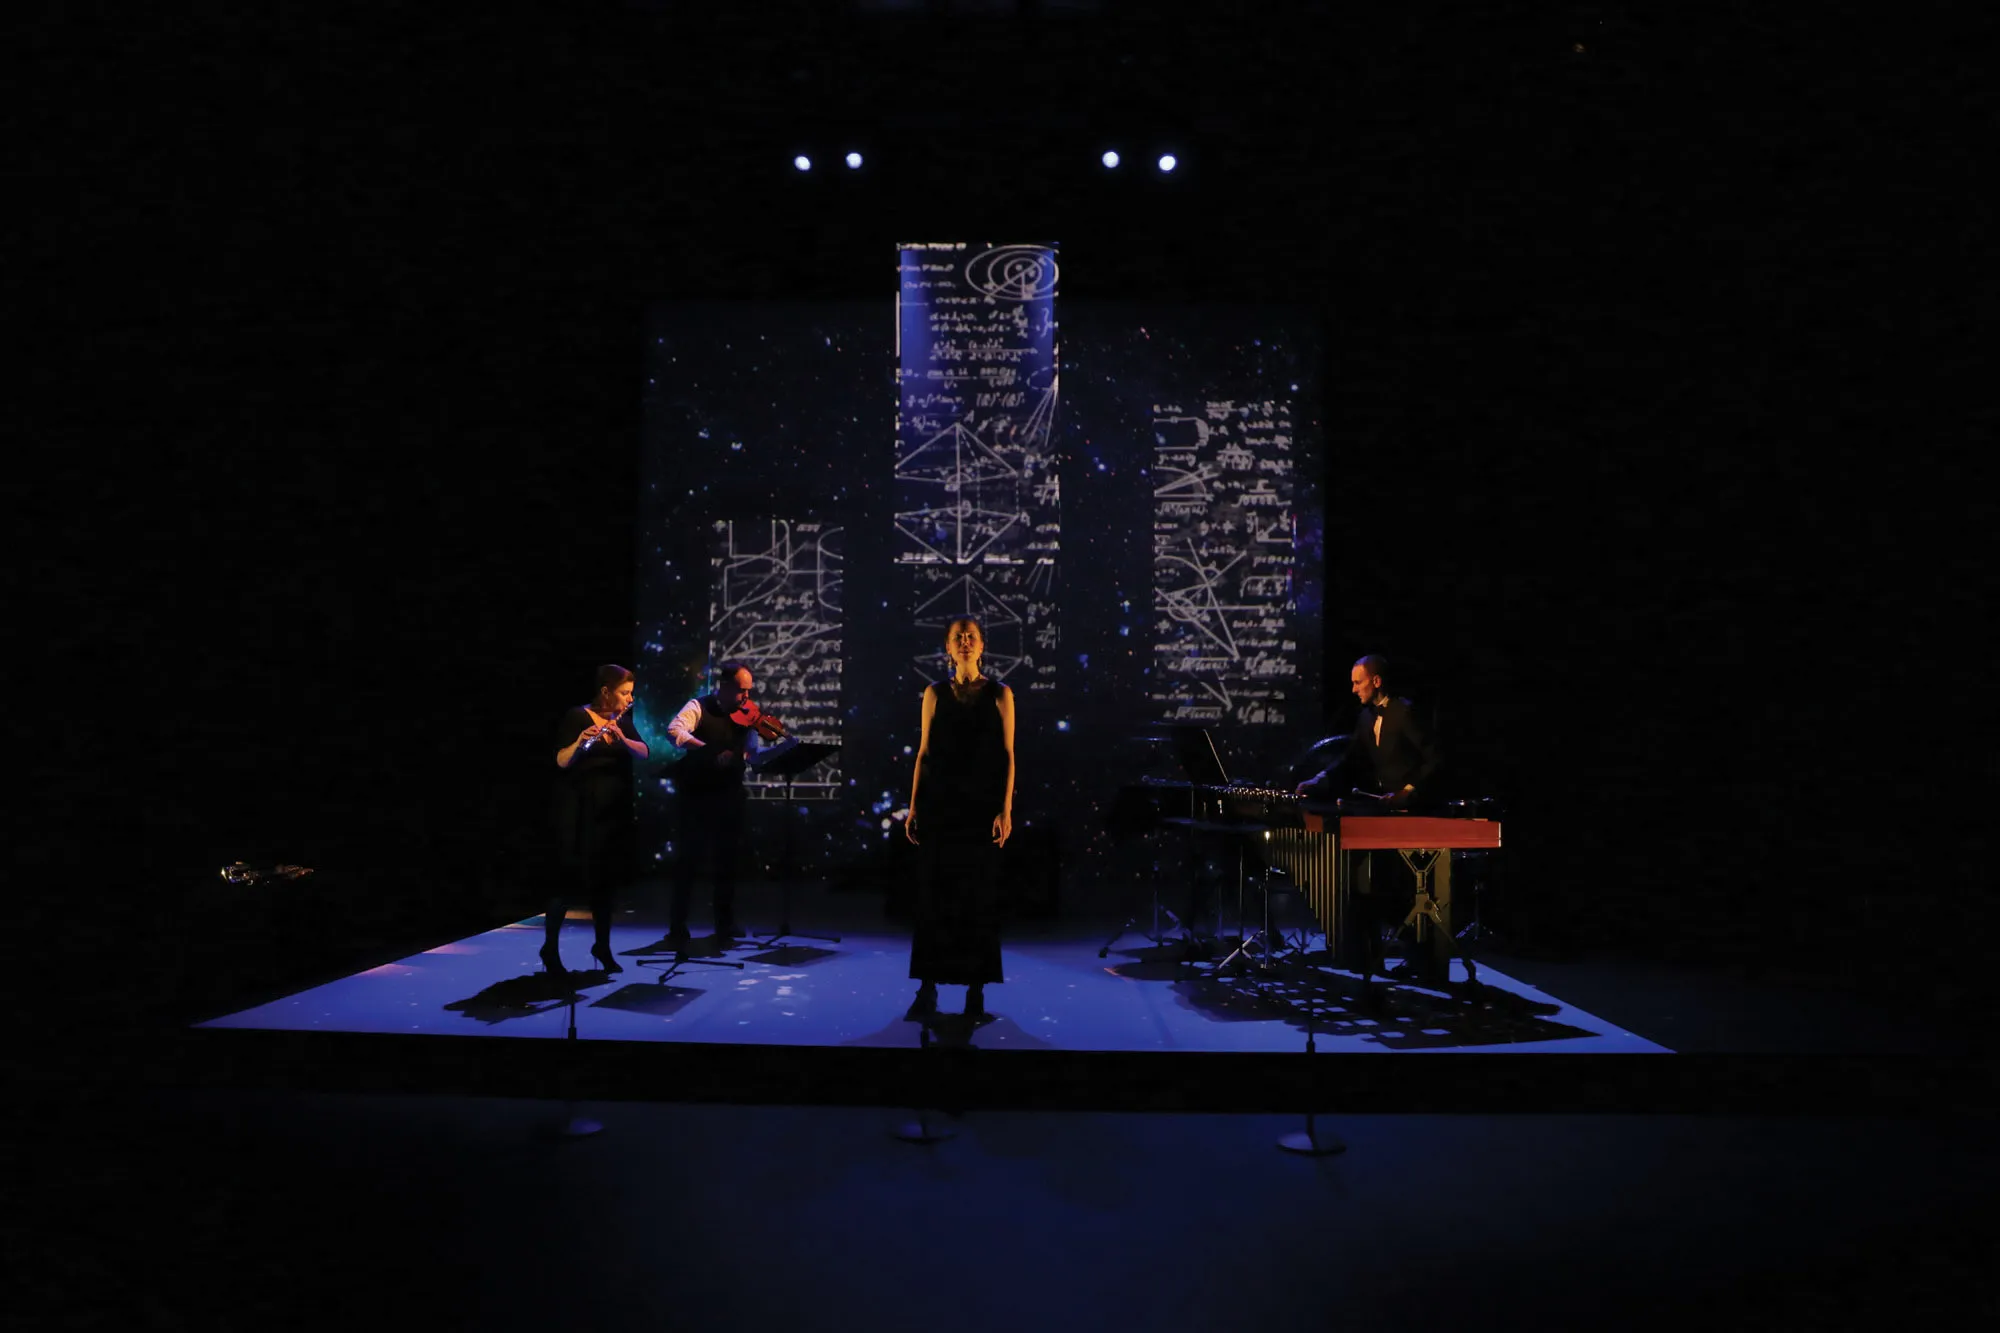 A woman standing on a dark stage lit with blue light in front of projections mathematical equations was three musicians play behind her. 